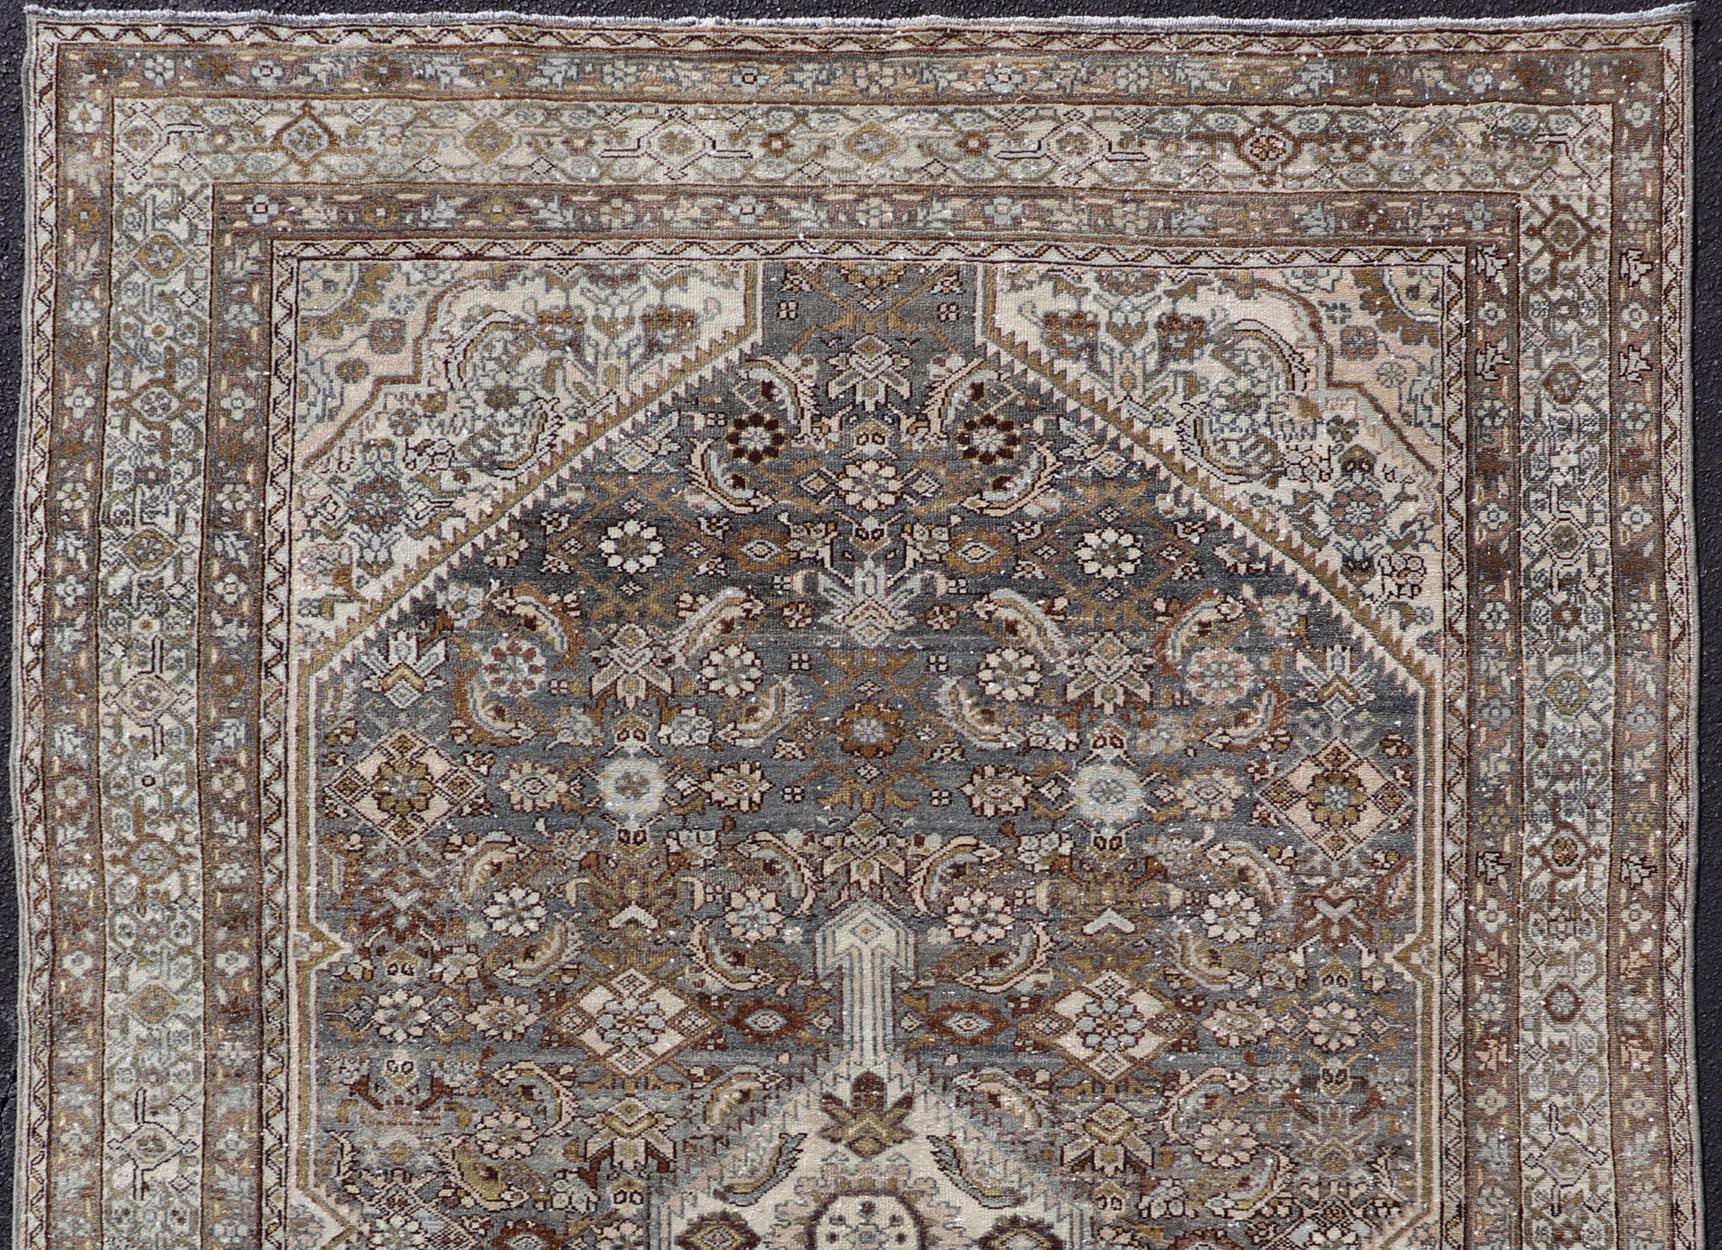 Wool Antique Persian Bibikabad Carpet with Steal Blue, Charcoal, Green, and Brown  For Sale